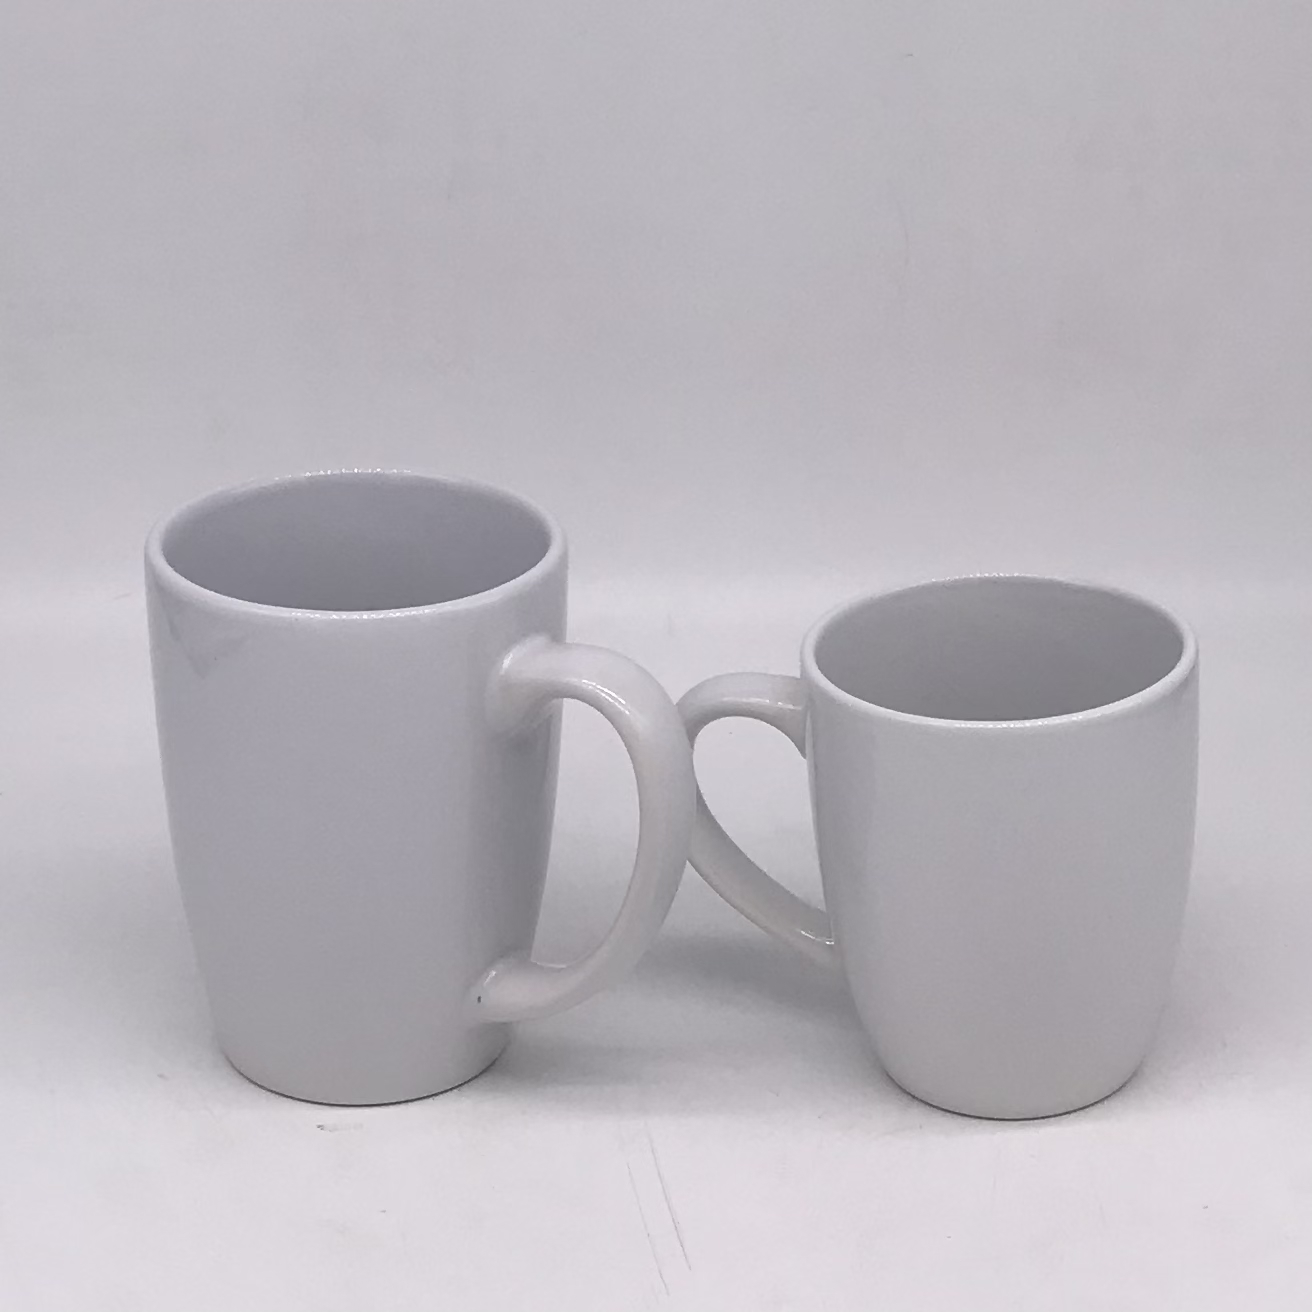 Blank Porcelain Mugs and Cups, Plain White and Black Ceramic Sublimation Coffee Cups and Mugs Featured Image